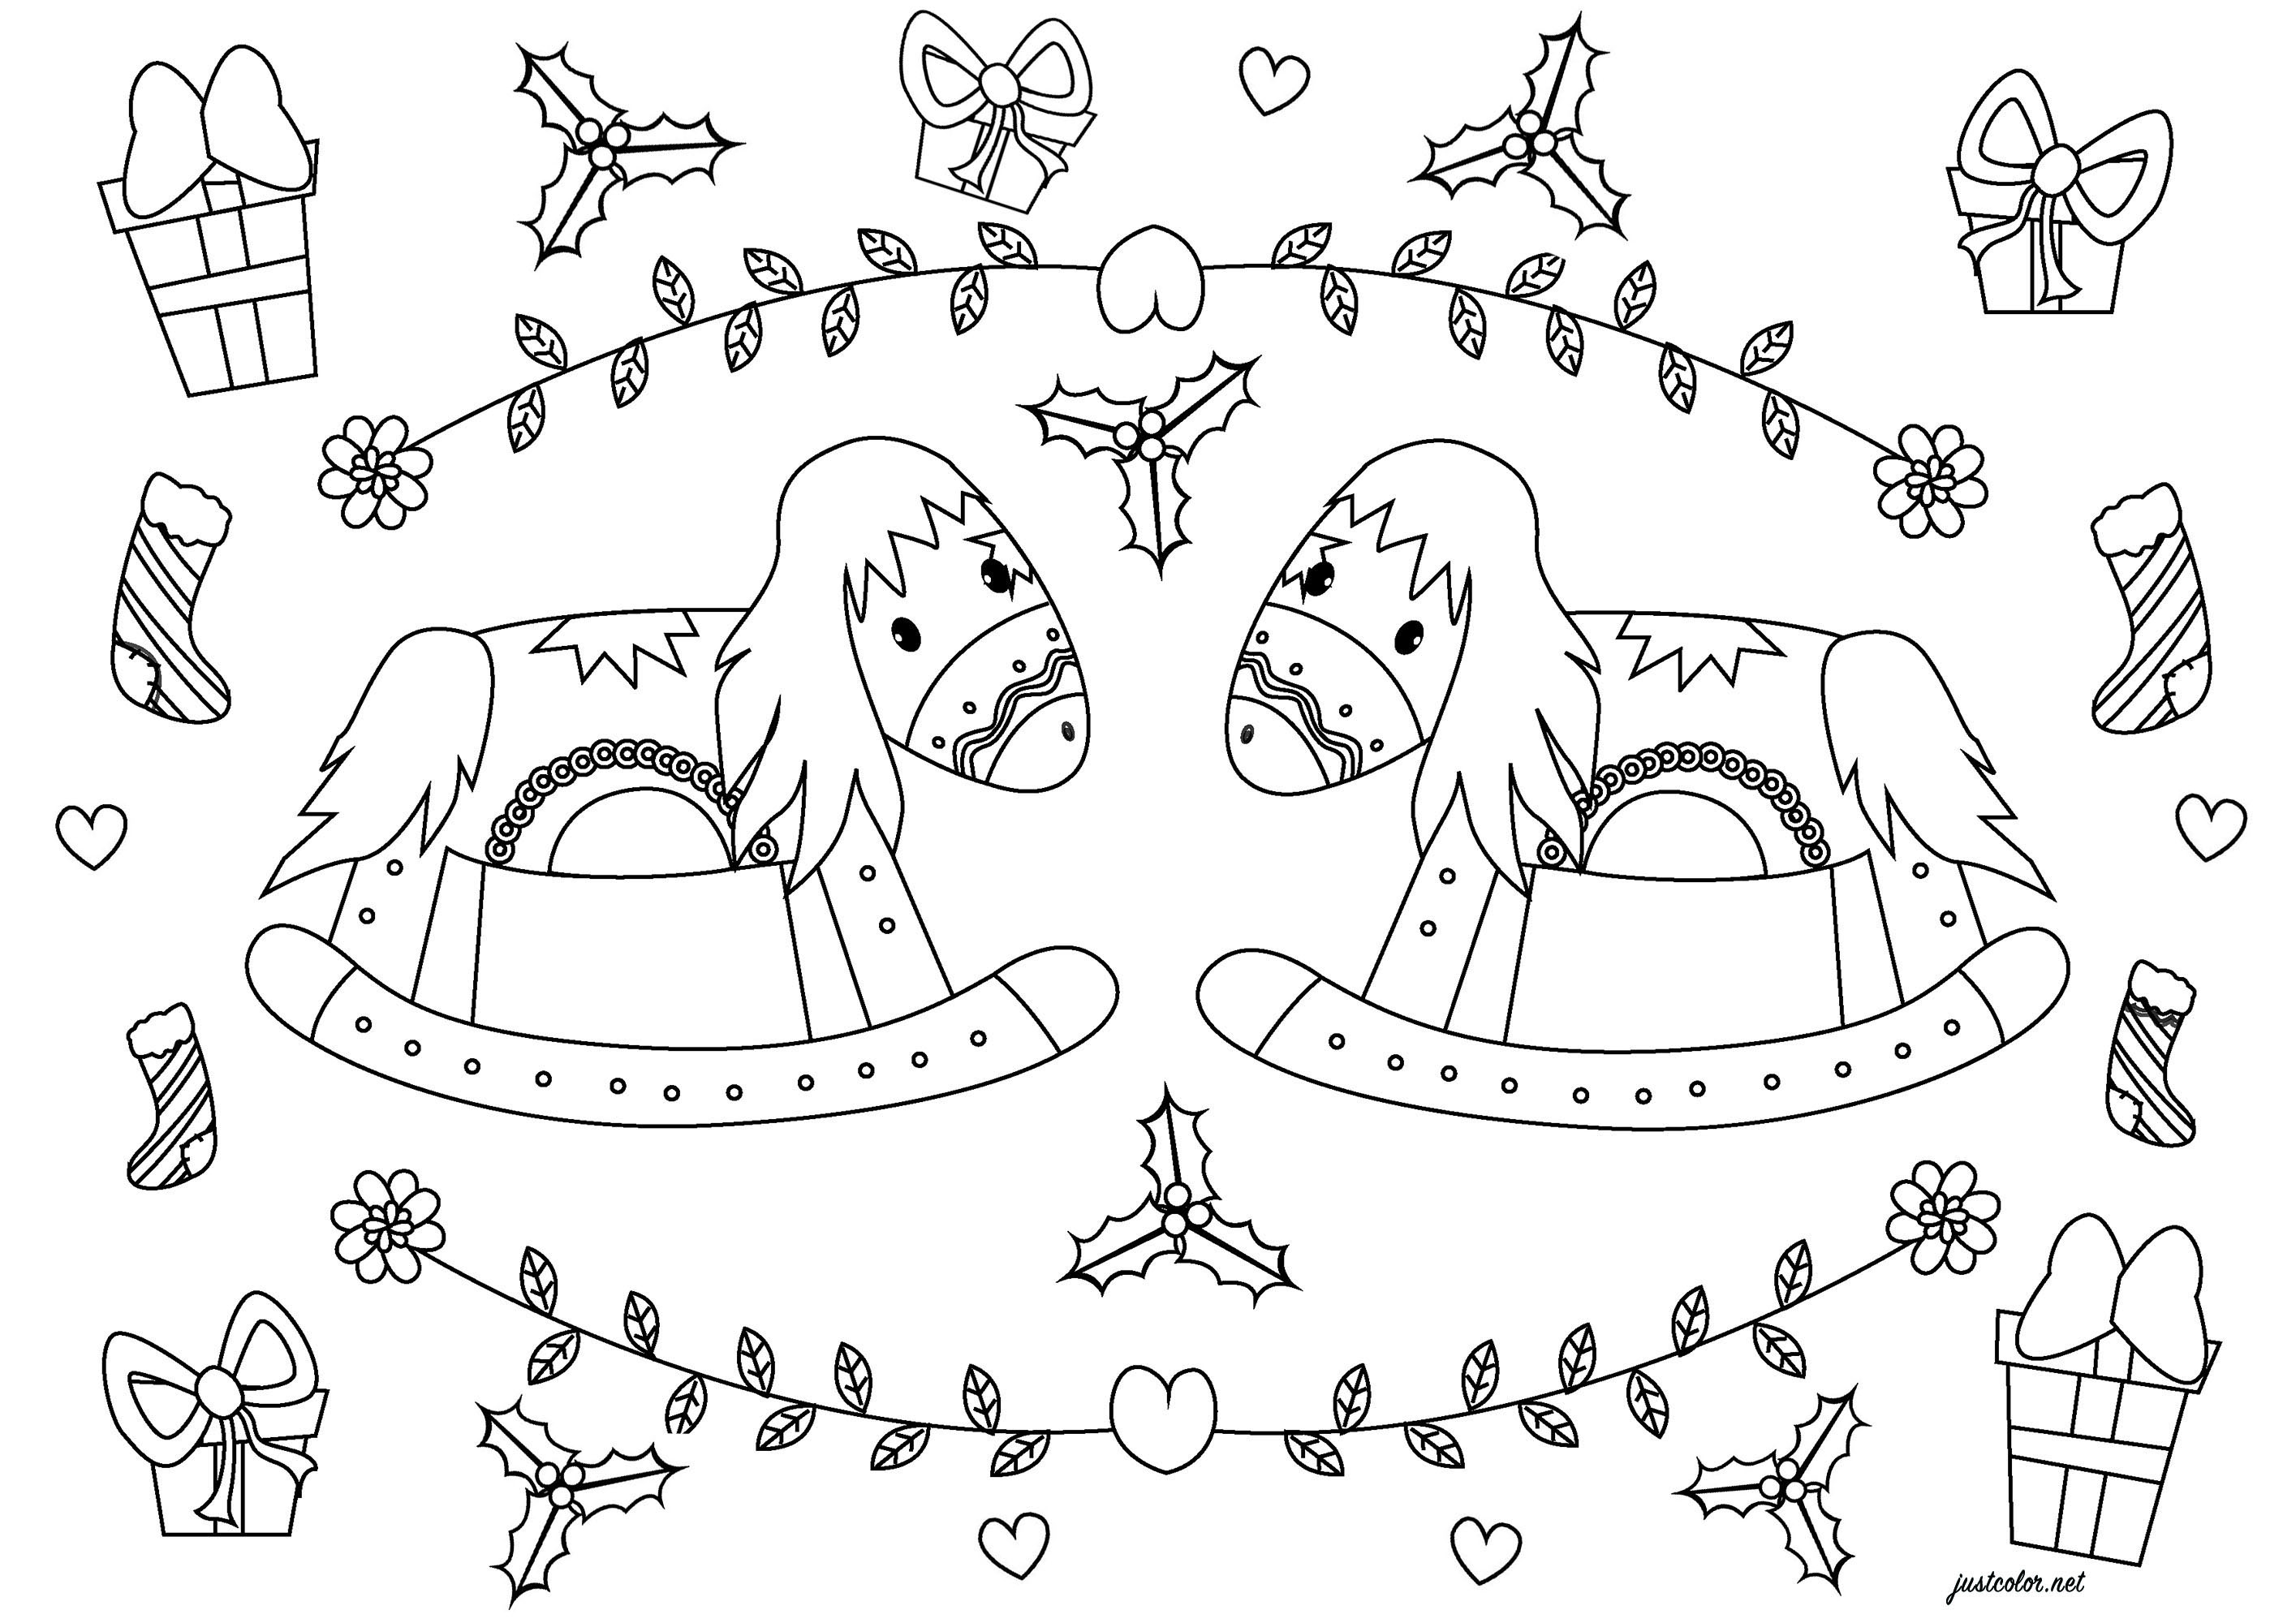 An original Christmas coloring page with two rocking horses. Colour in many typical Christmas elements too